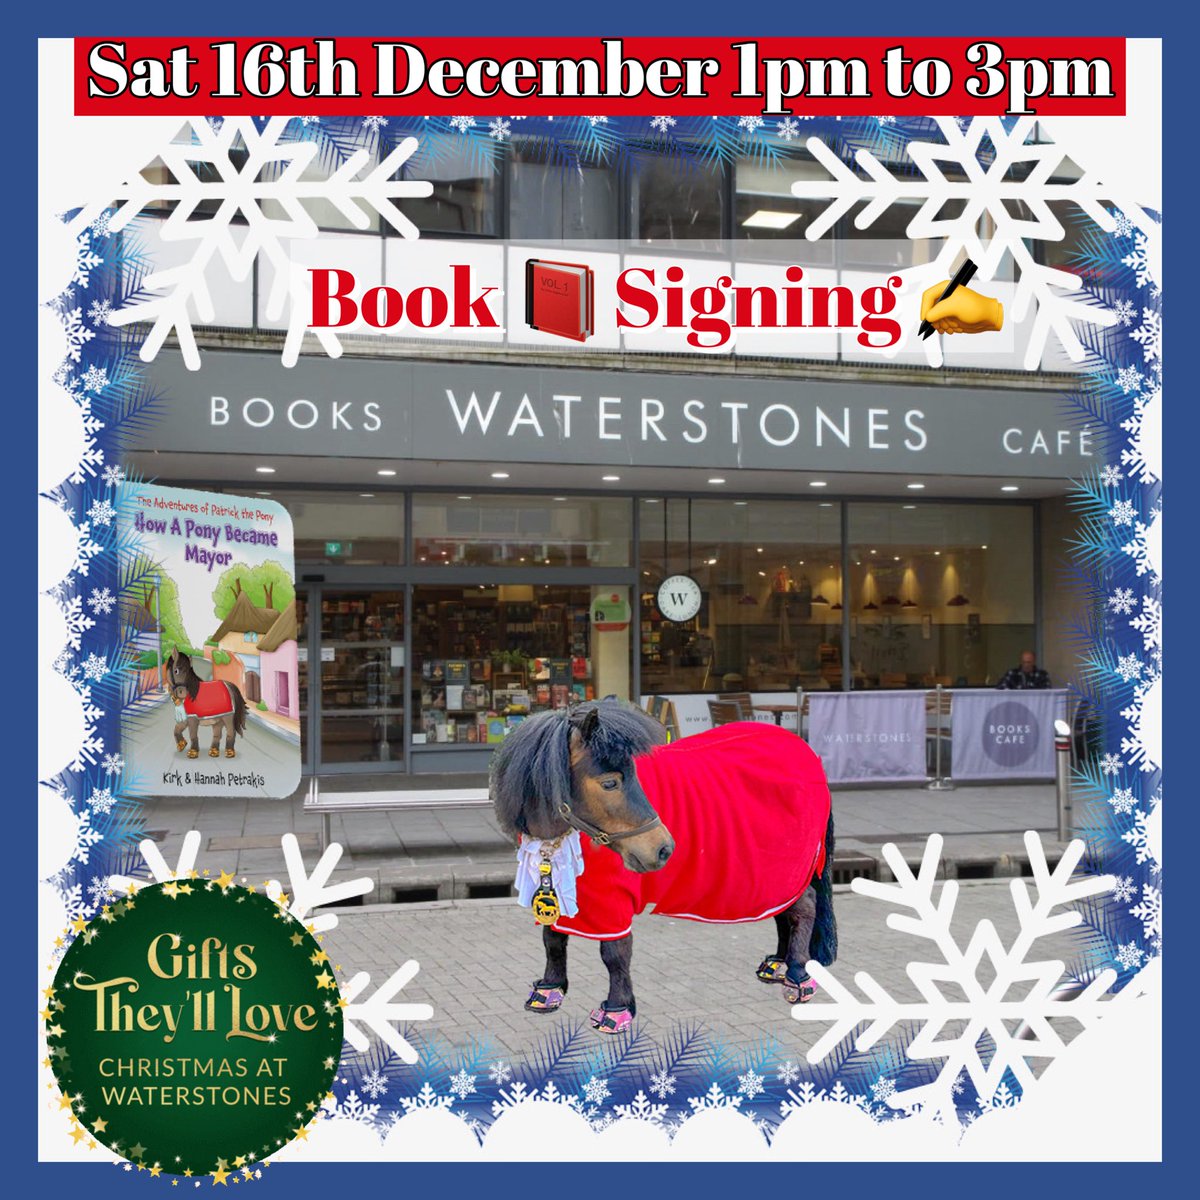 Breaking News: Book Signing on Saturday the 16th of December between 1pm to 3pm at Waterstones, Union Street, Torquay. Only limited books available 🐴 @aponyhour @freeboostpromo @DevonLiveNews @torquayjim @boostdigmednet @WhatsonSW @BBCSpotlight @itvwestcountry @BBCDevon @GMB